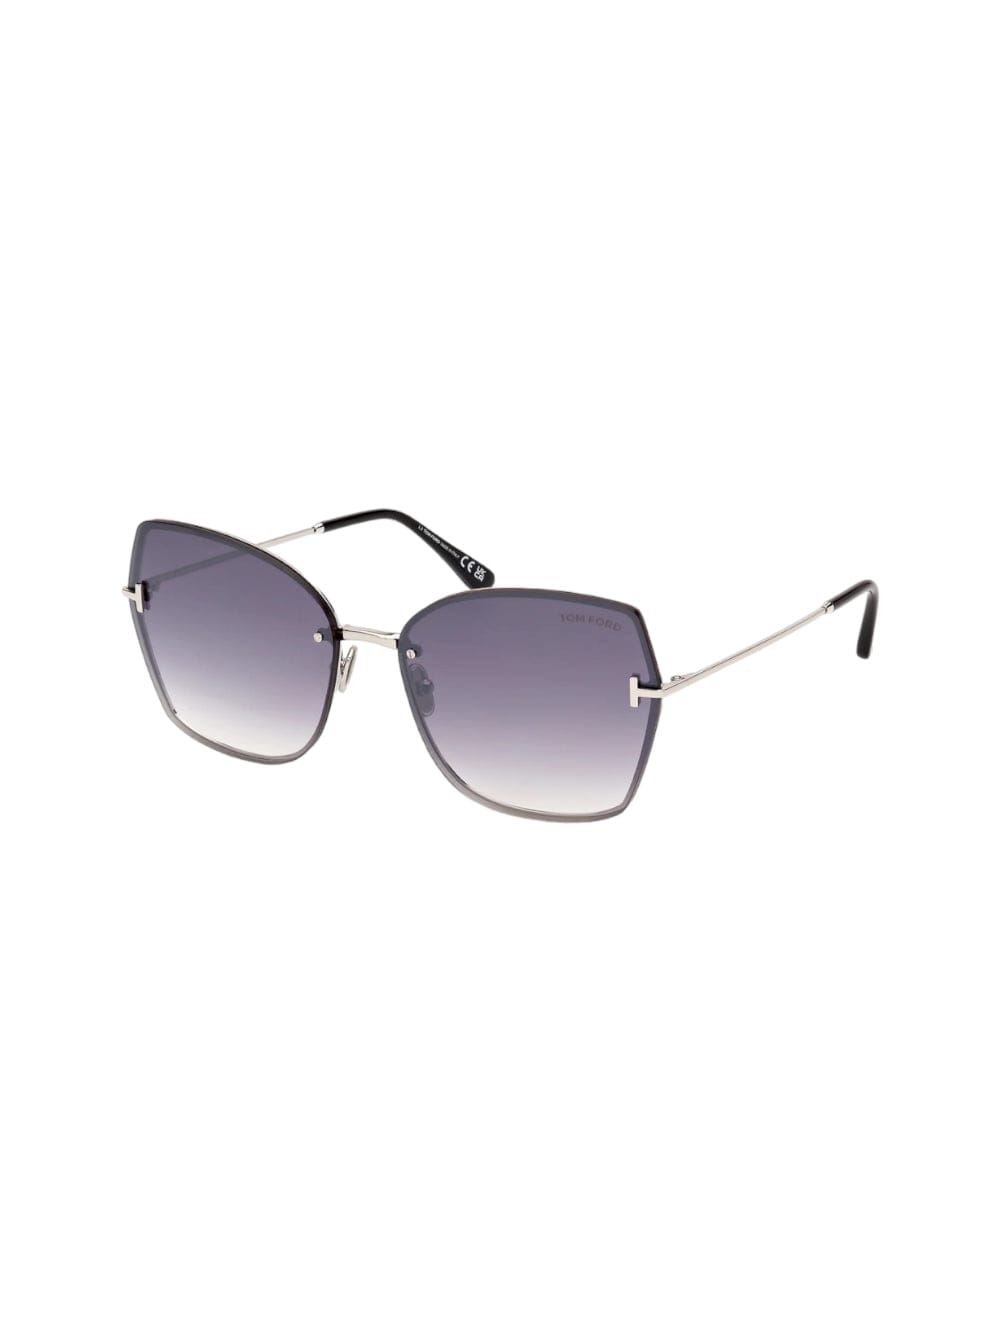 Tom Ford Ft 1107 /s Sunglasses In Gray